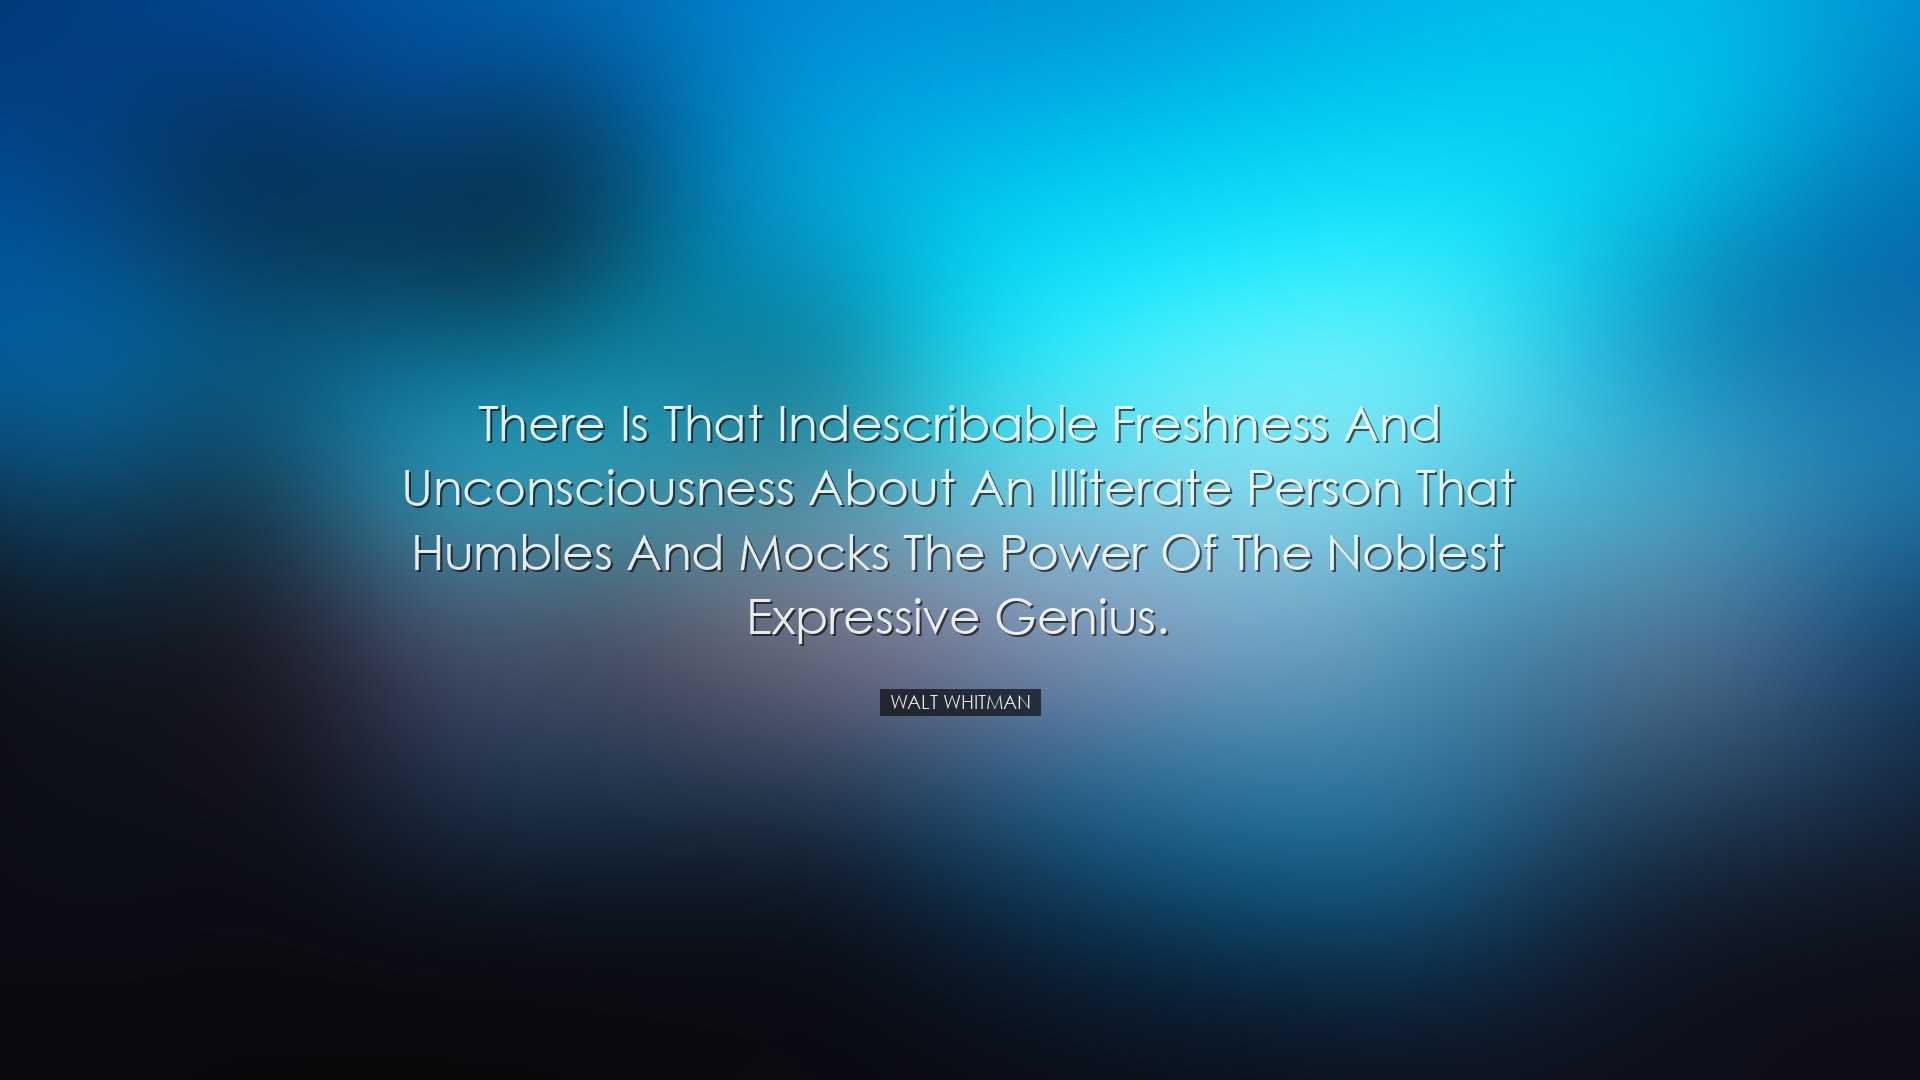 There is that indescribable freshness and unconsciousness about an